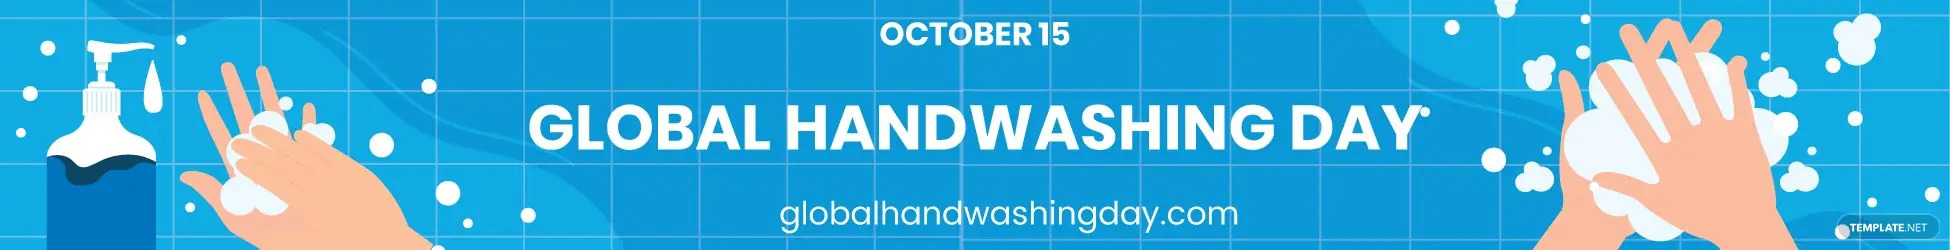 global handwashing day website banner ideas and examples